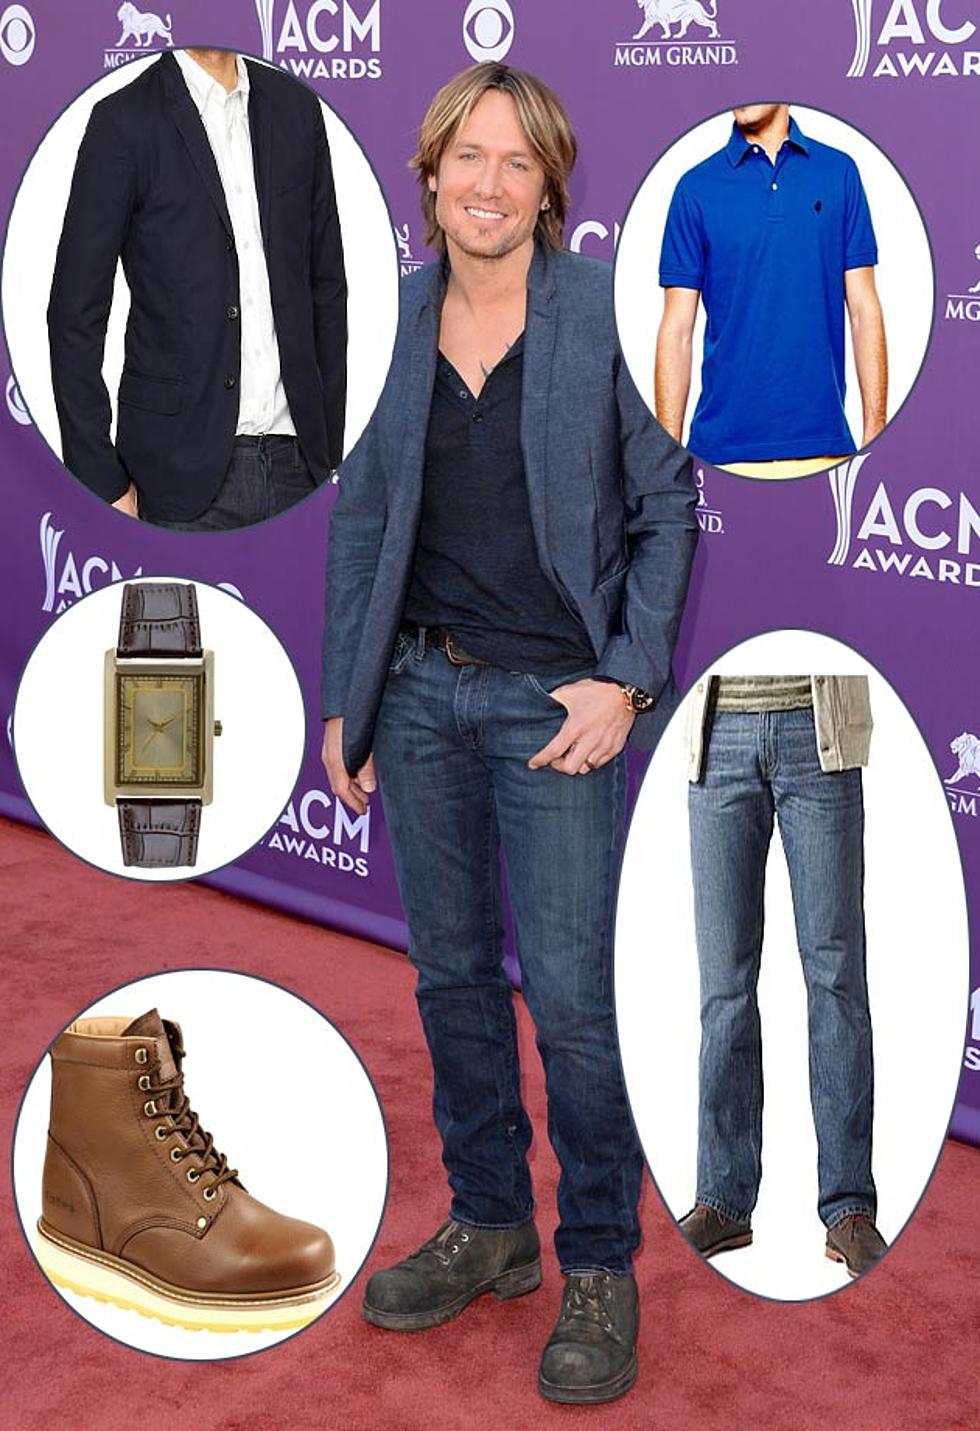 Keith Urban Dresses Up Denim With a Blazer and Boots – Get the Look